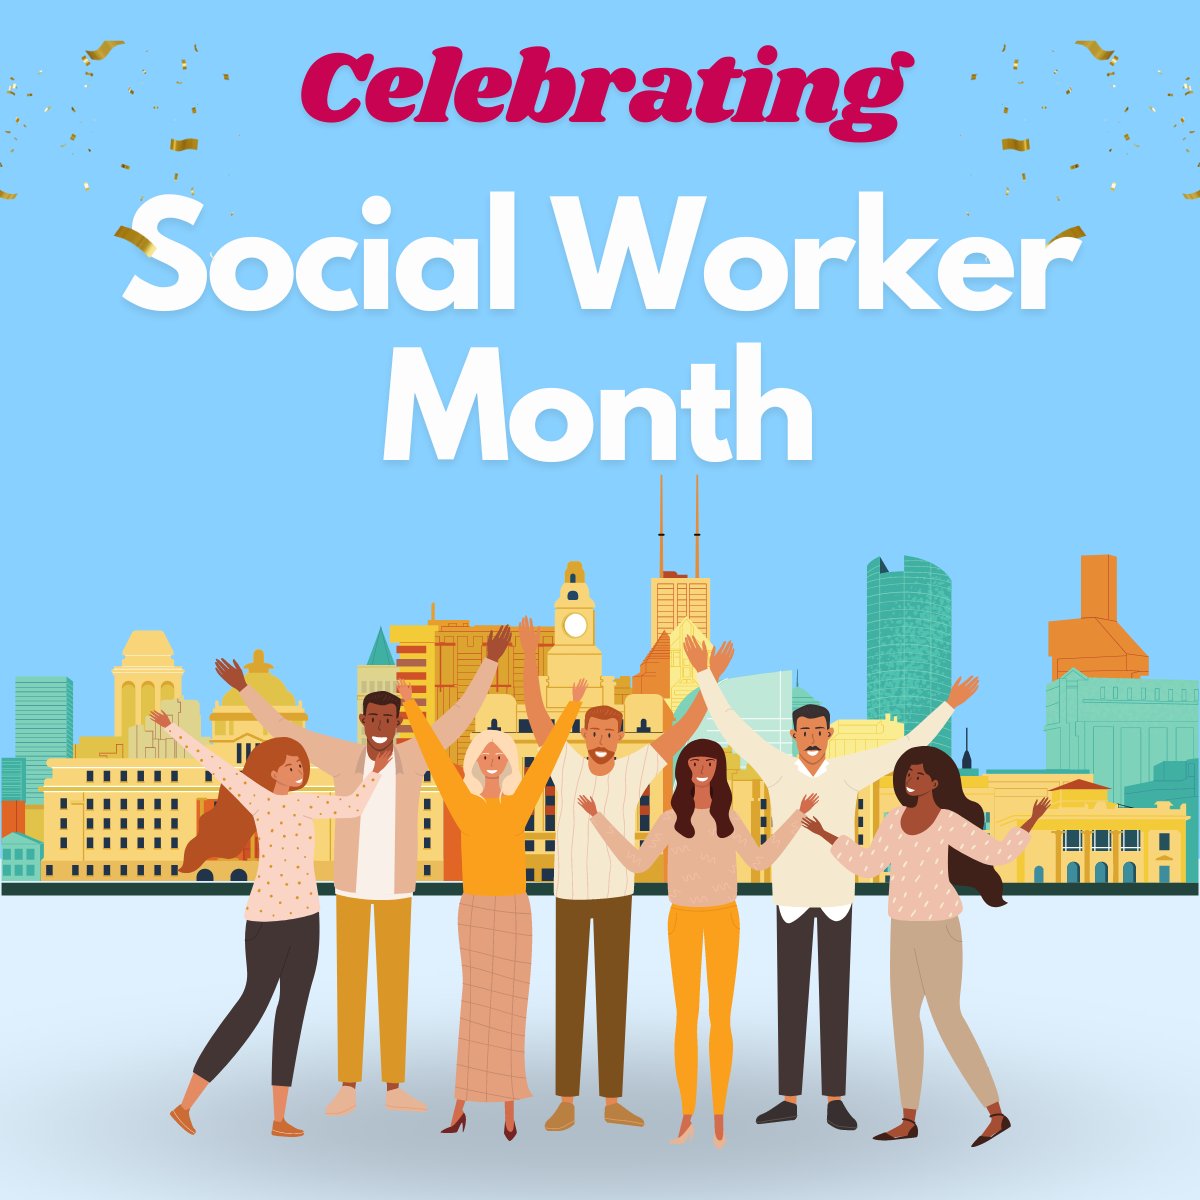 MCAP  believes in #EmpoweringSocialWorkers and supports better pay for the important work they do in helping people reach their full potential. #SWMonth2024 #EmpoweringSocialWorkers #SocialWorkMonth
#MCAPConnect2024